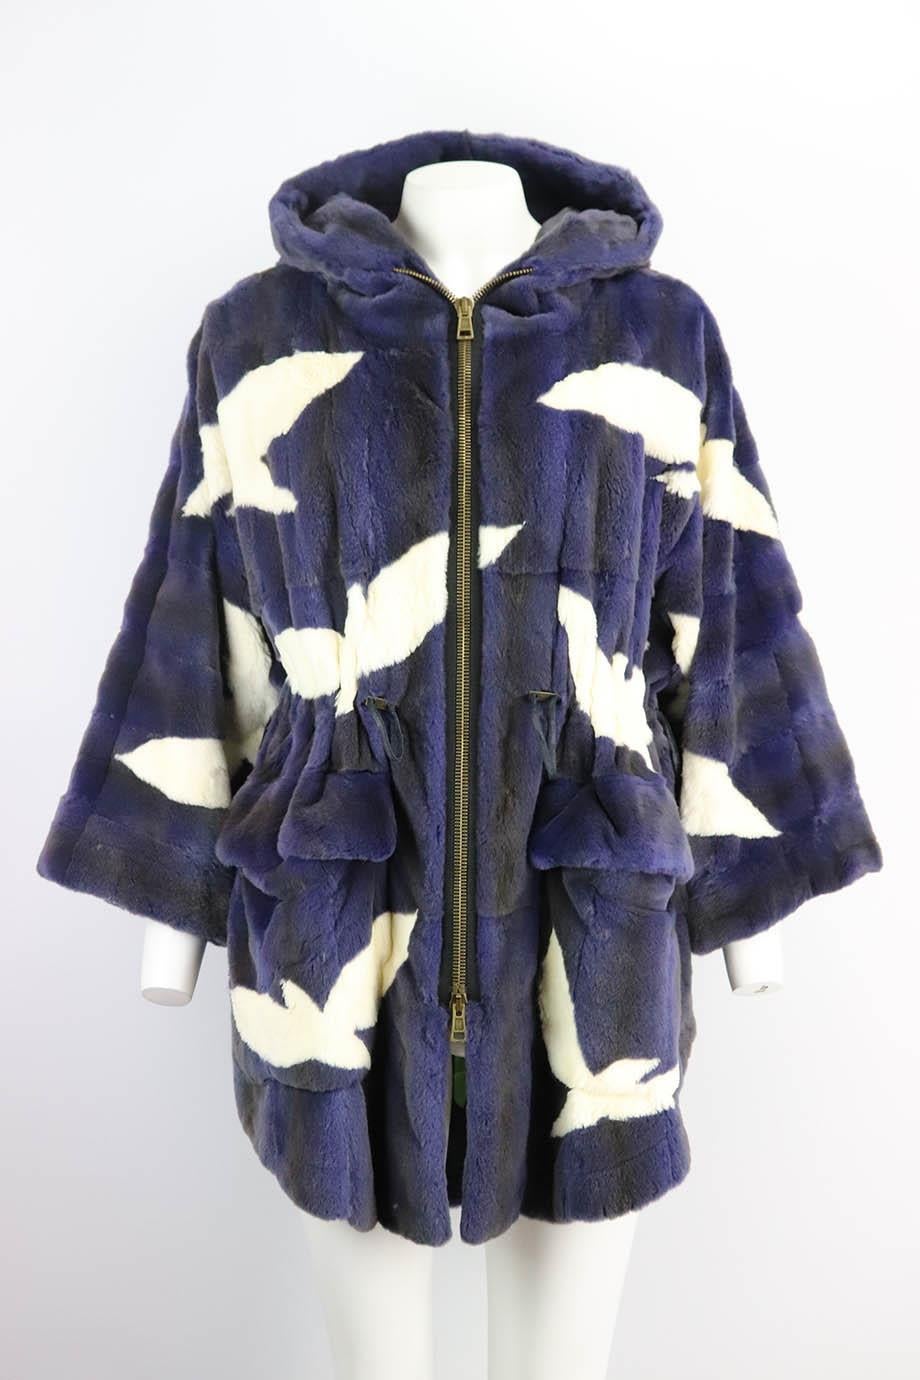 Helen Yarmak hooded printed fur coat. Made from navy and ivory bird-printed weasel-fur coat with drawstring waist and violet-printed silk lining. Blue and white. Long sleeve, crewneck. Zip fastening at front. Size: Large (UK 12, US 8, FR 40, IT 44).